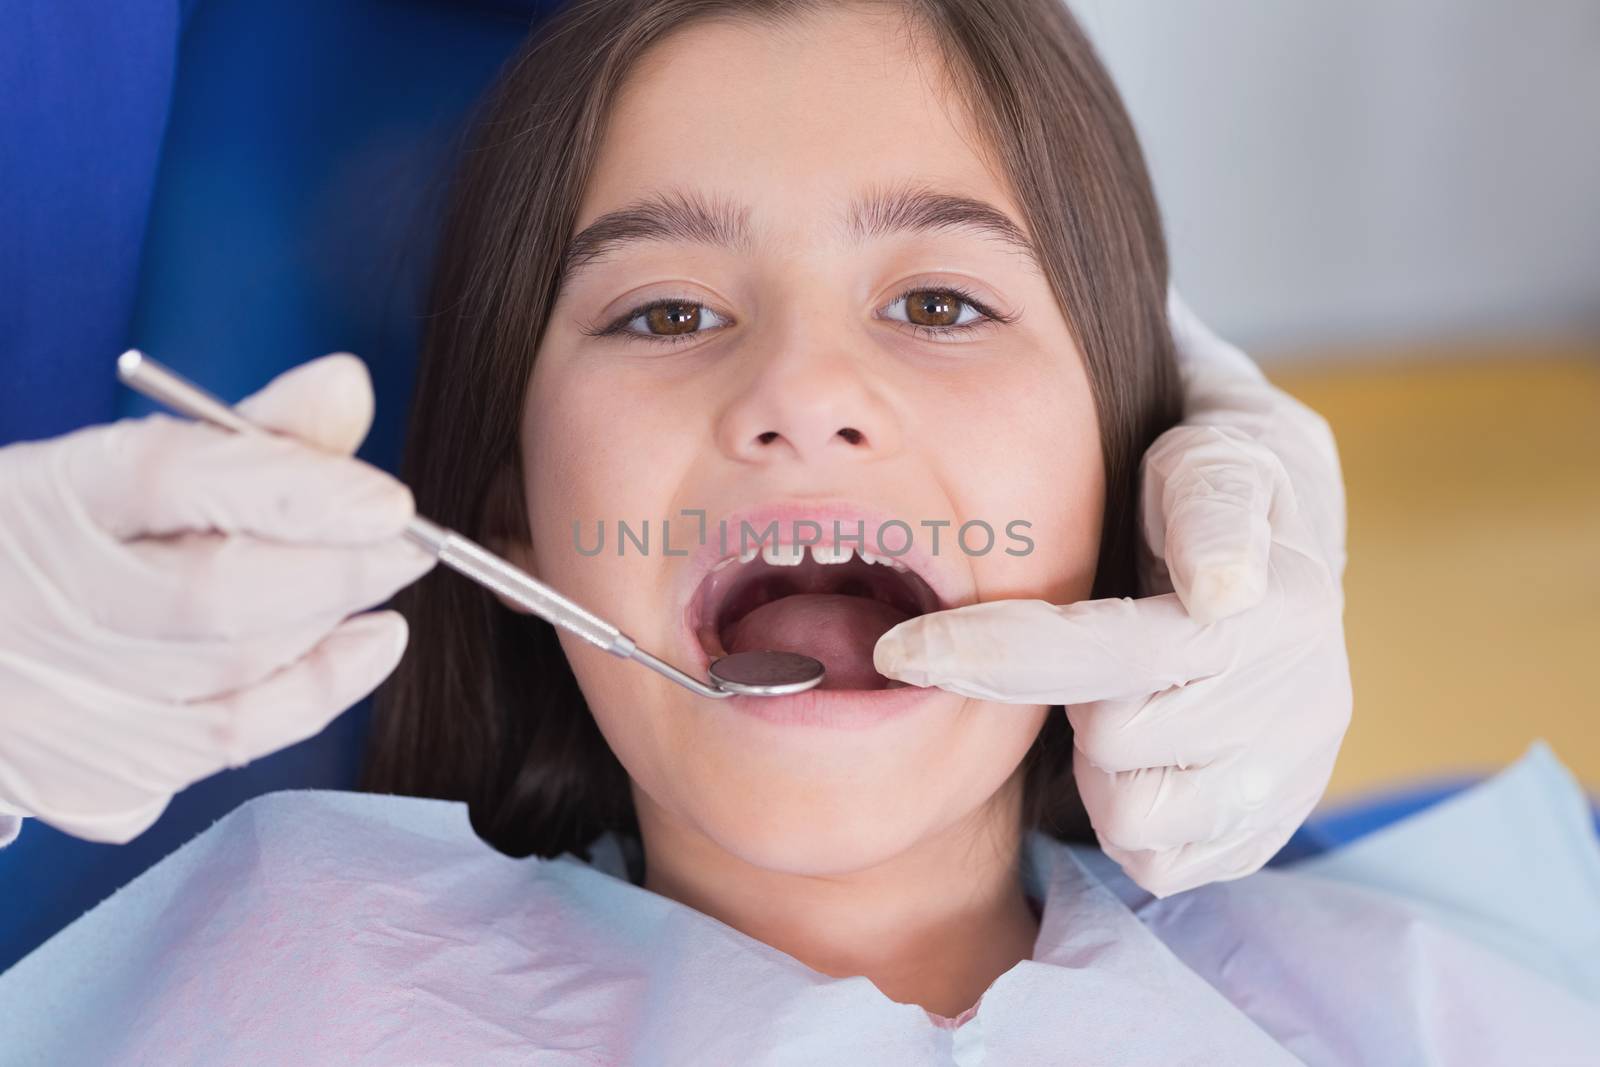 Portrait of a young patient in dental examination by Wavebreakmedia